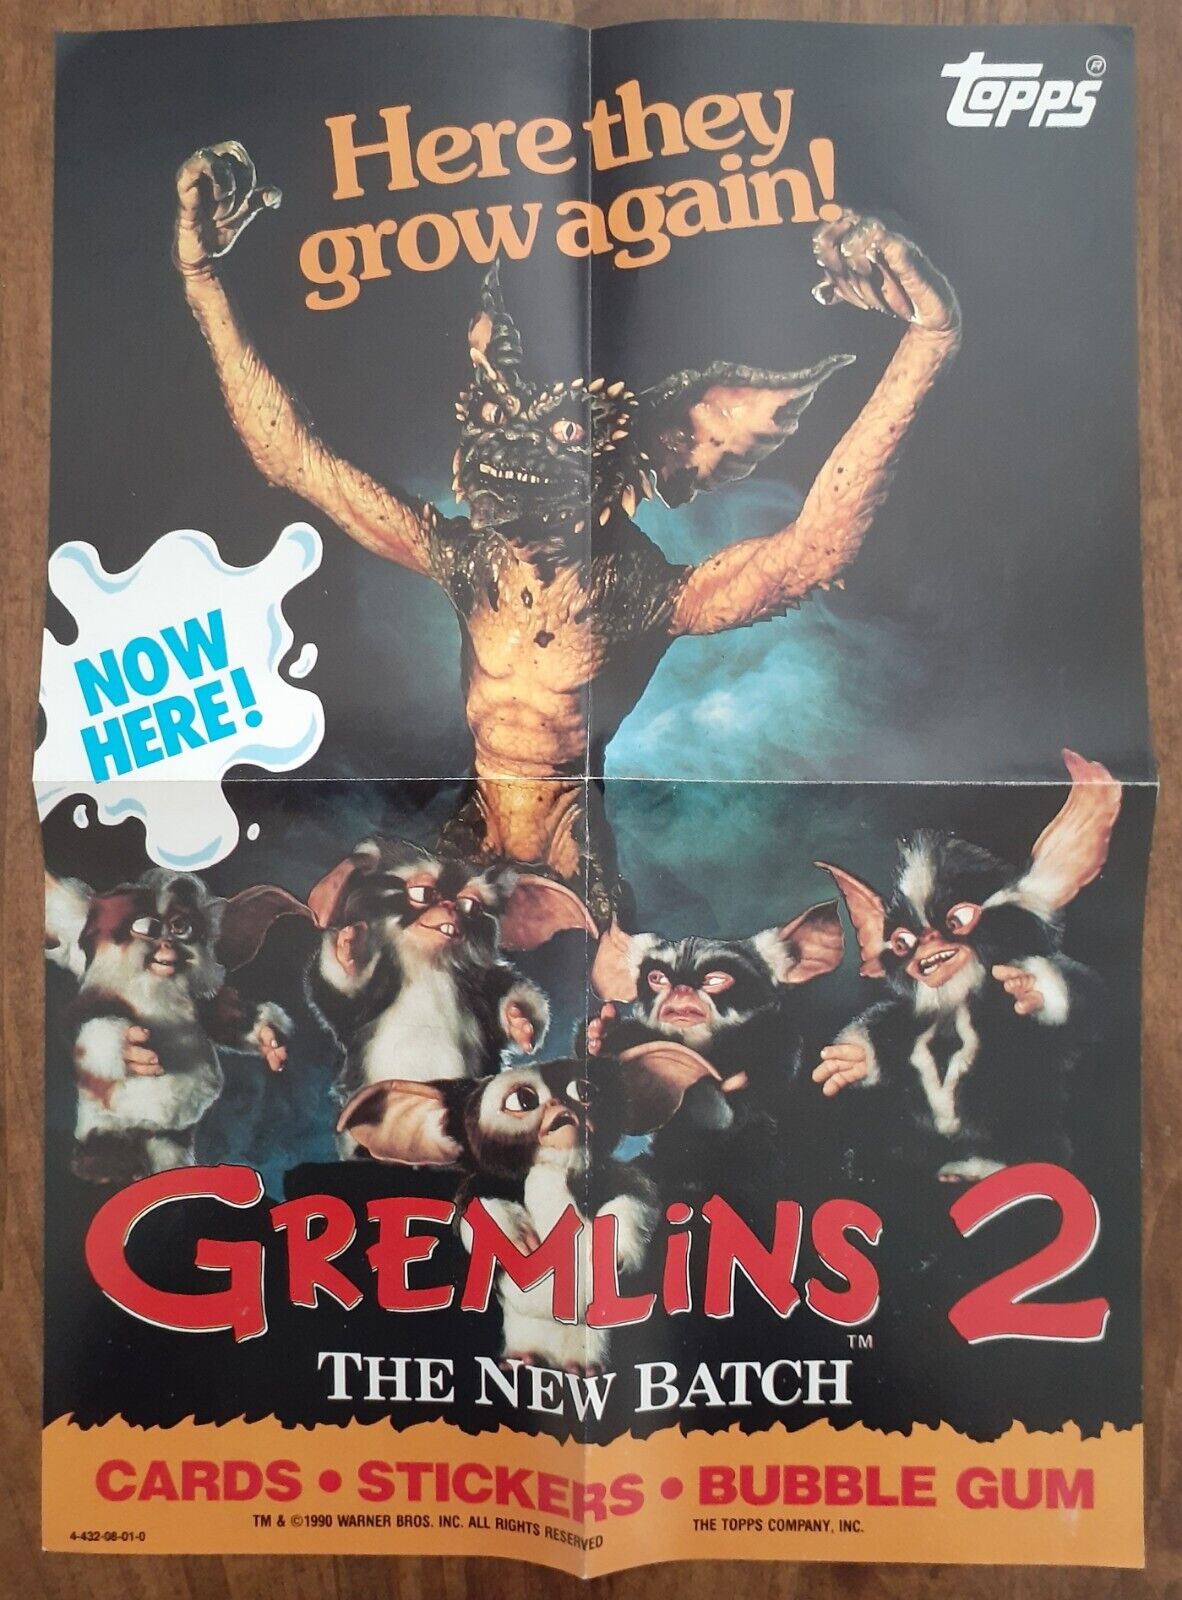 Topps 1989 GREMLINS II Trading Card Store Display Poster 10 x 14 Mint Condition